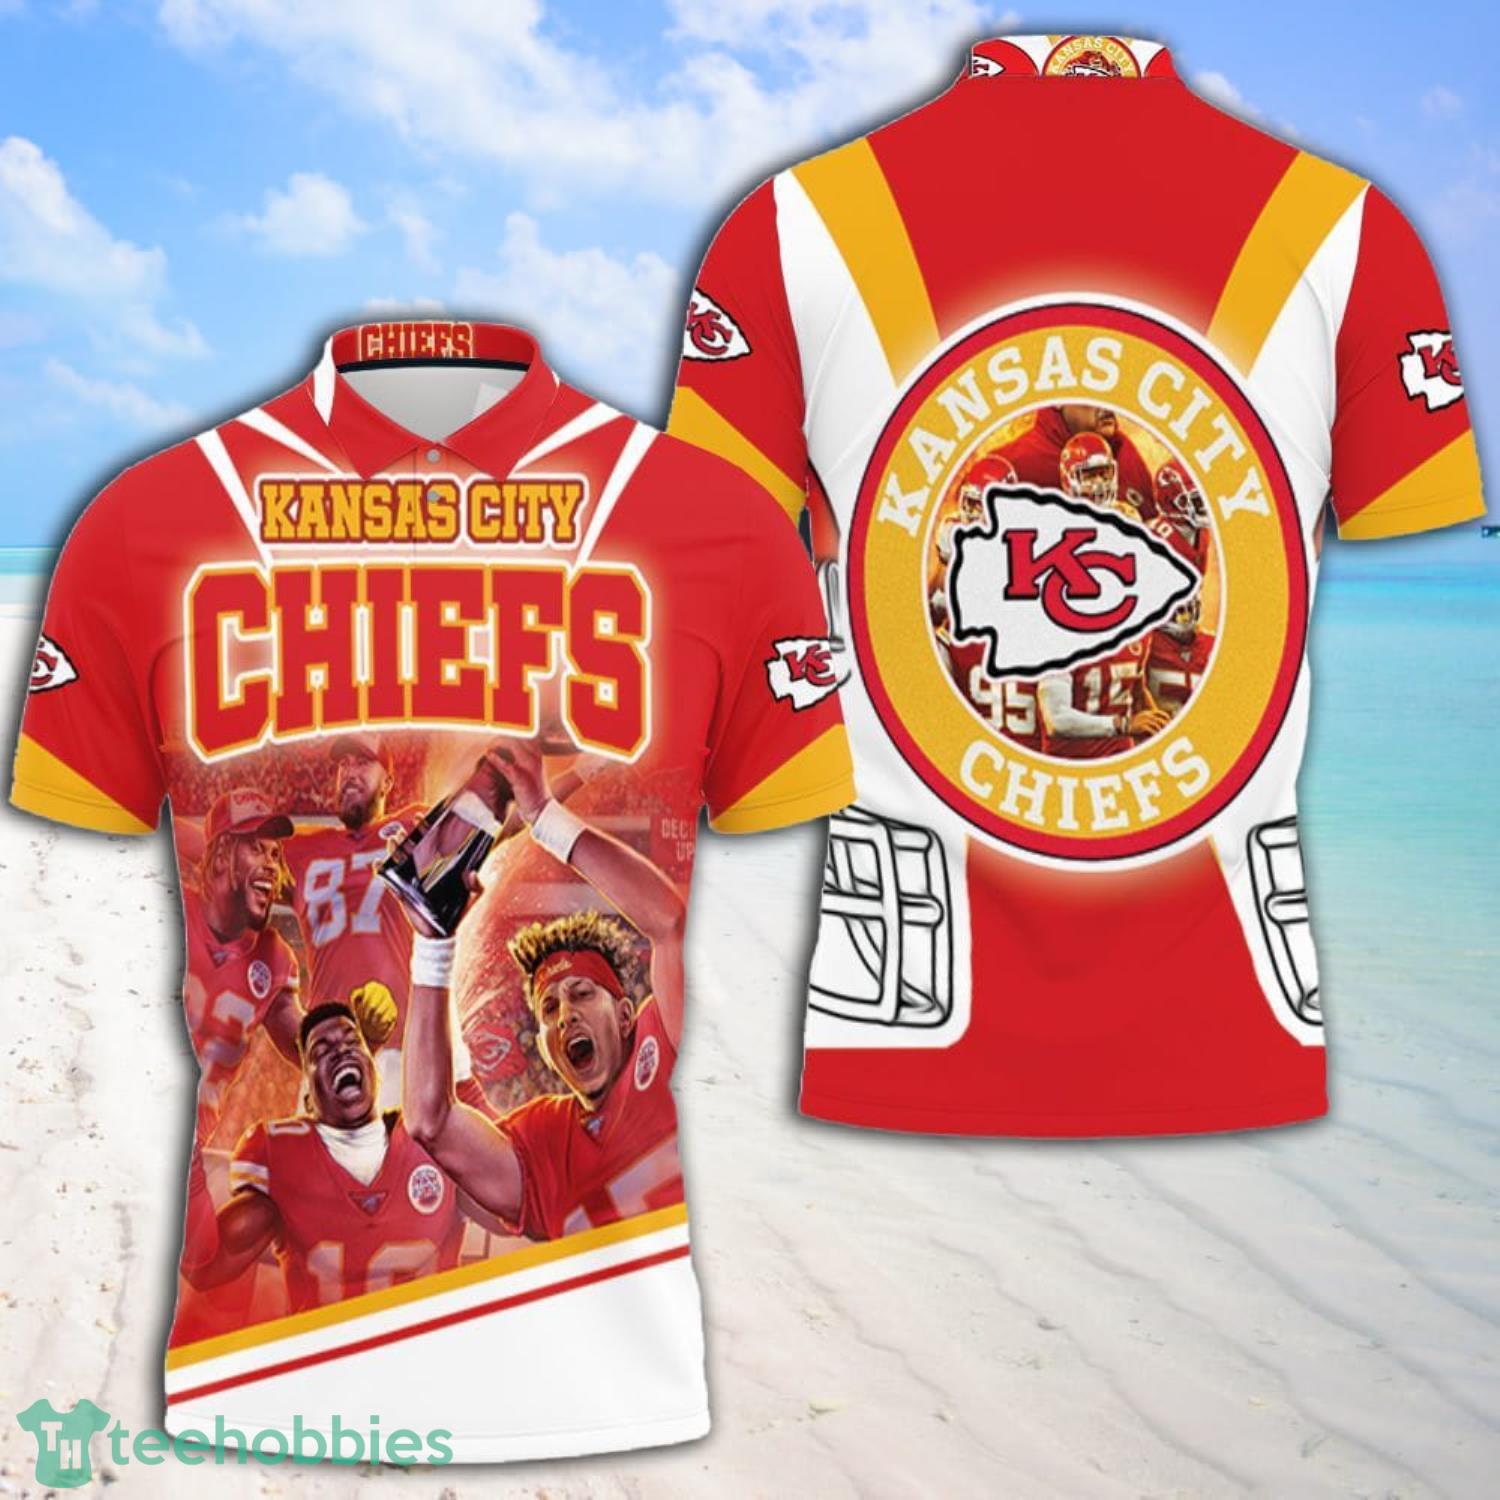 chiefs division champs 2021